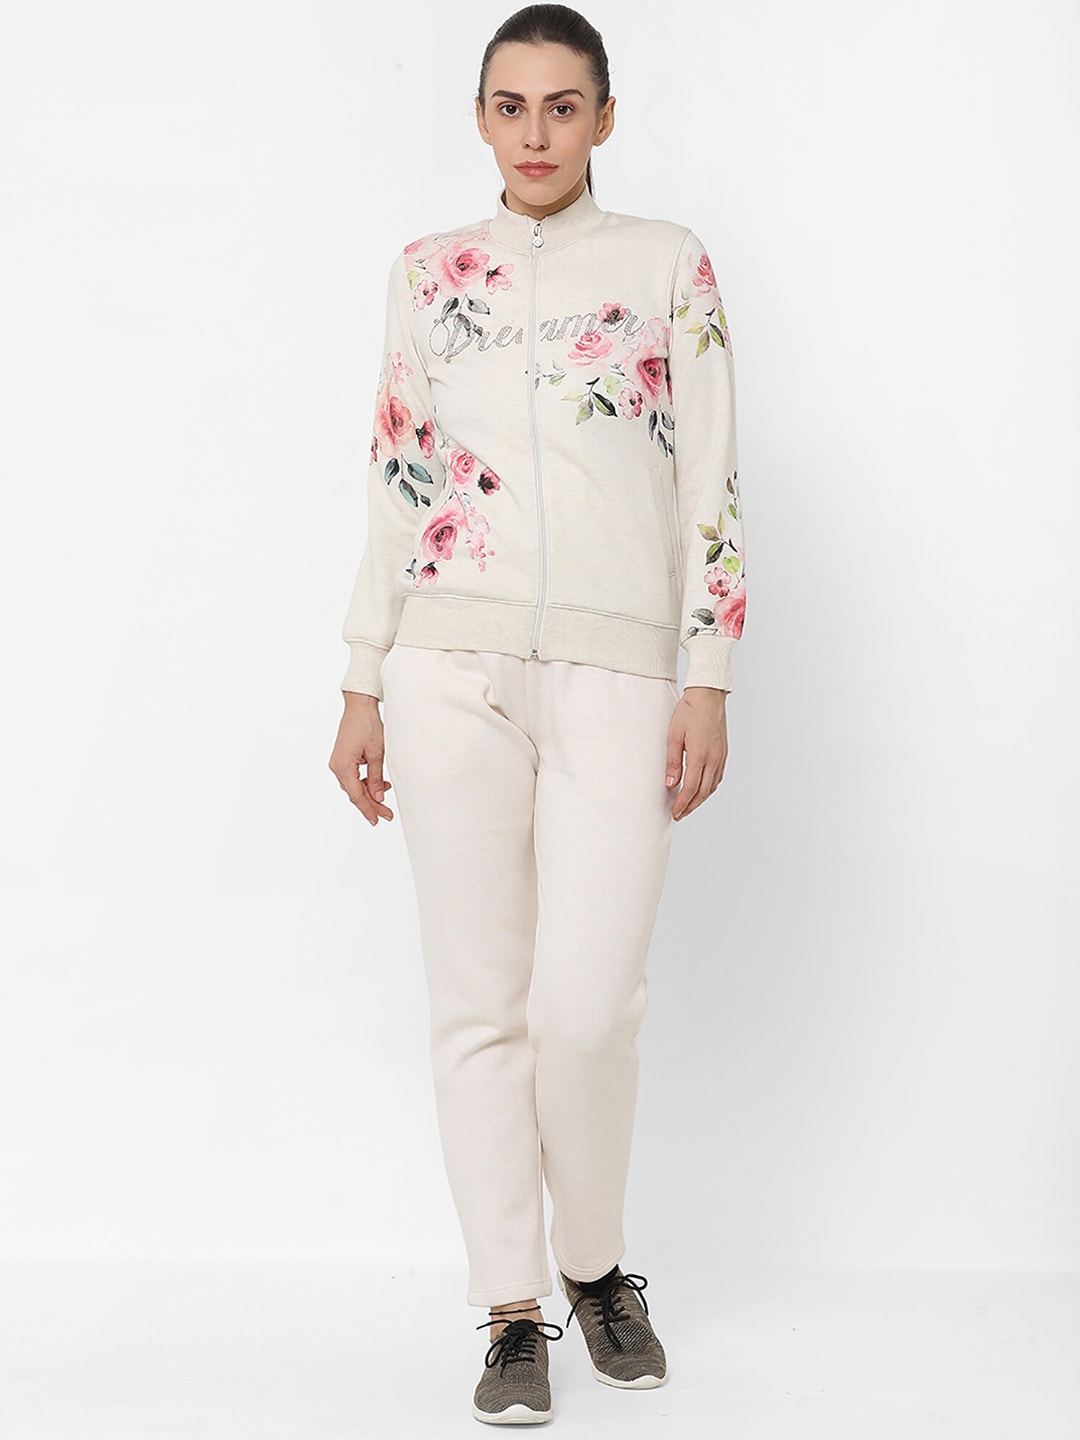 Sweet Dreams Women White & Pink Floral Printed Tracksuits Price in India